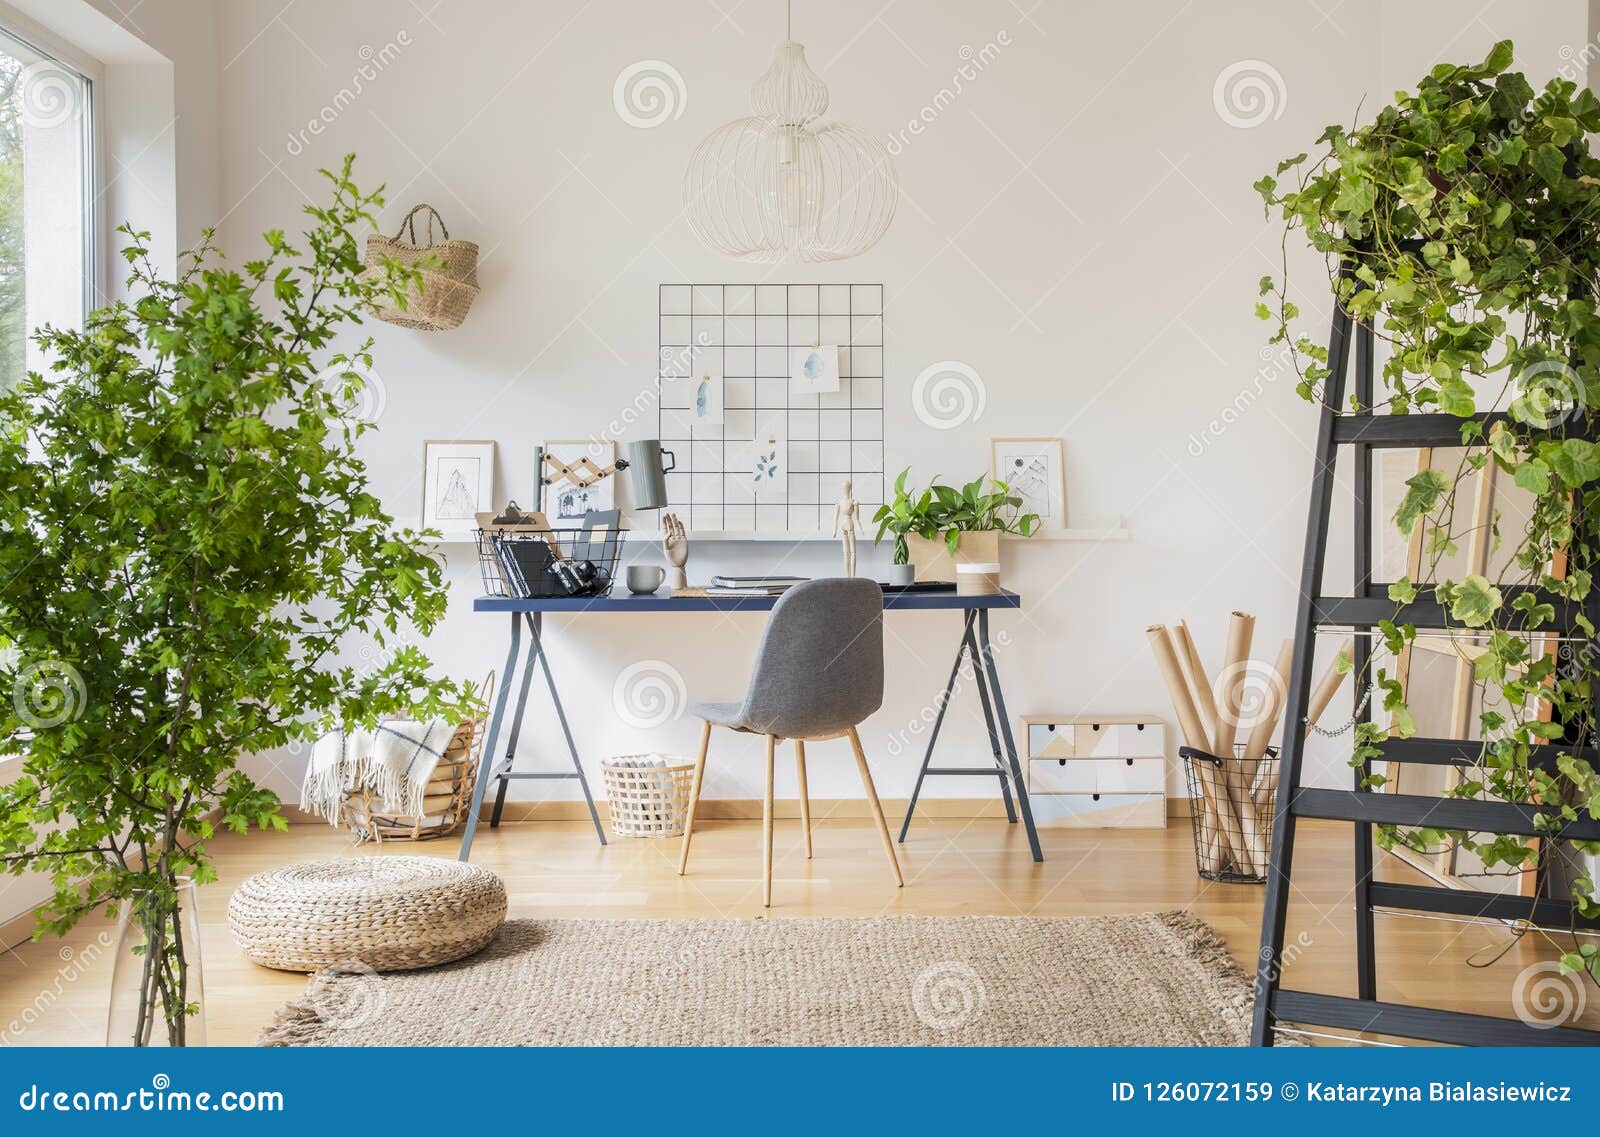 Plants in White Spacious Home Office Interior with Pouf on Carpet Near ...